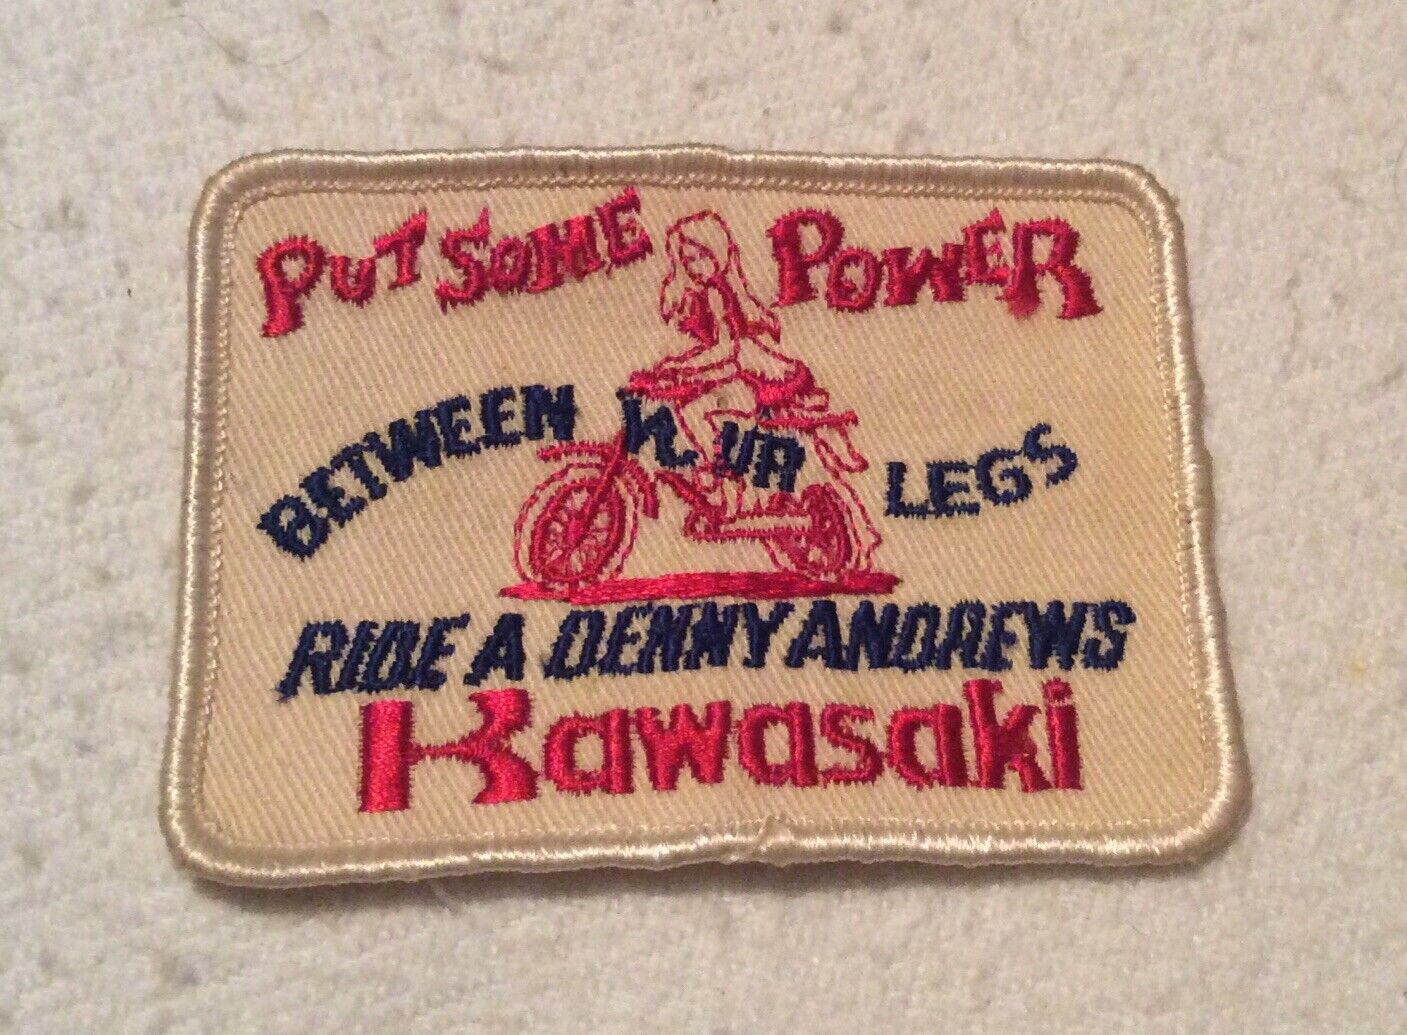 Kawasaki Patch Put Some Power Between Your Legs Vintage 3.25” X 2.5”